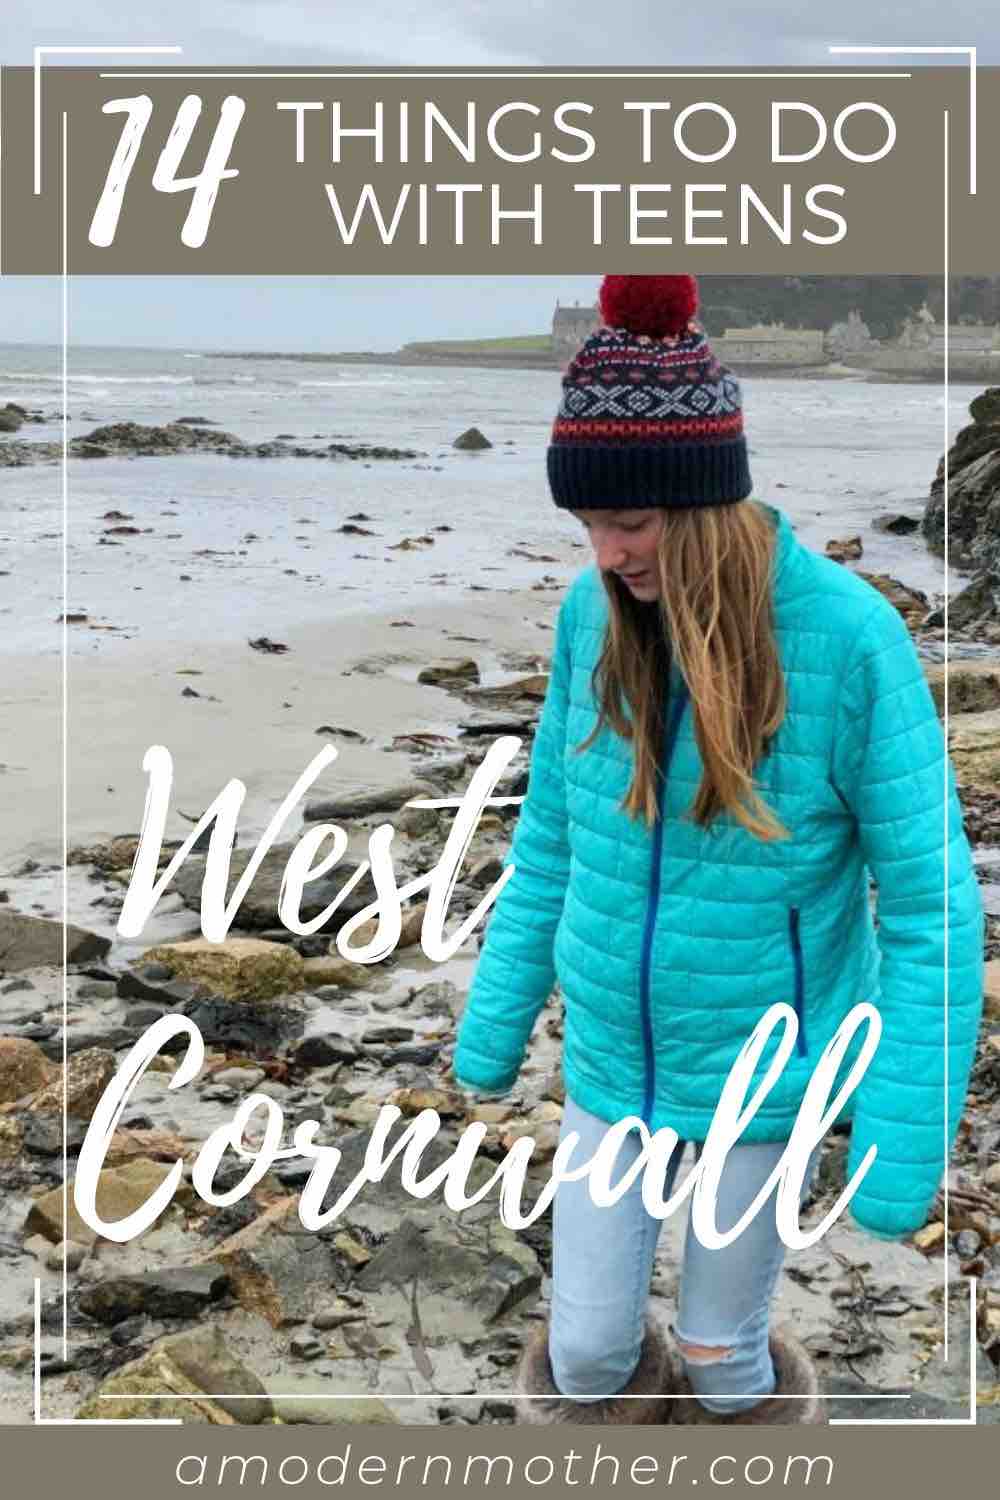 14 things to do in cornwall with teens - including surfing, museums, outdoor sports, beach, walking, where to eat and more!